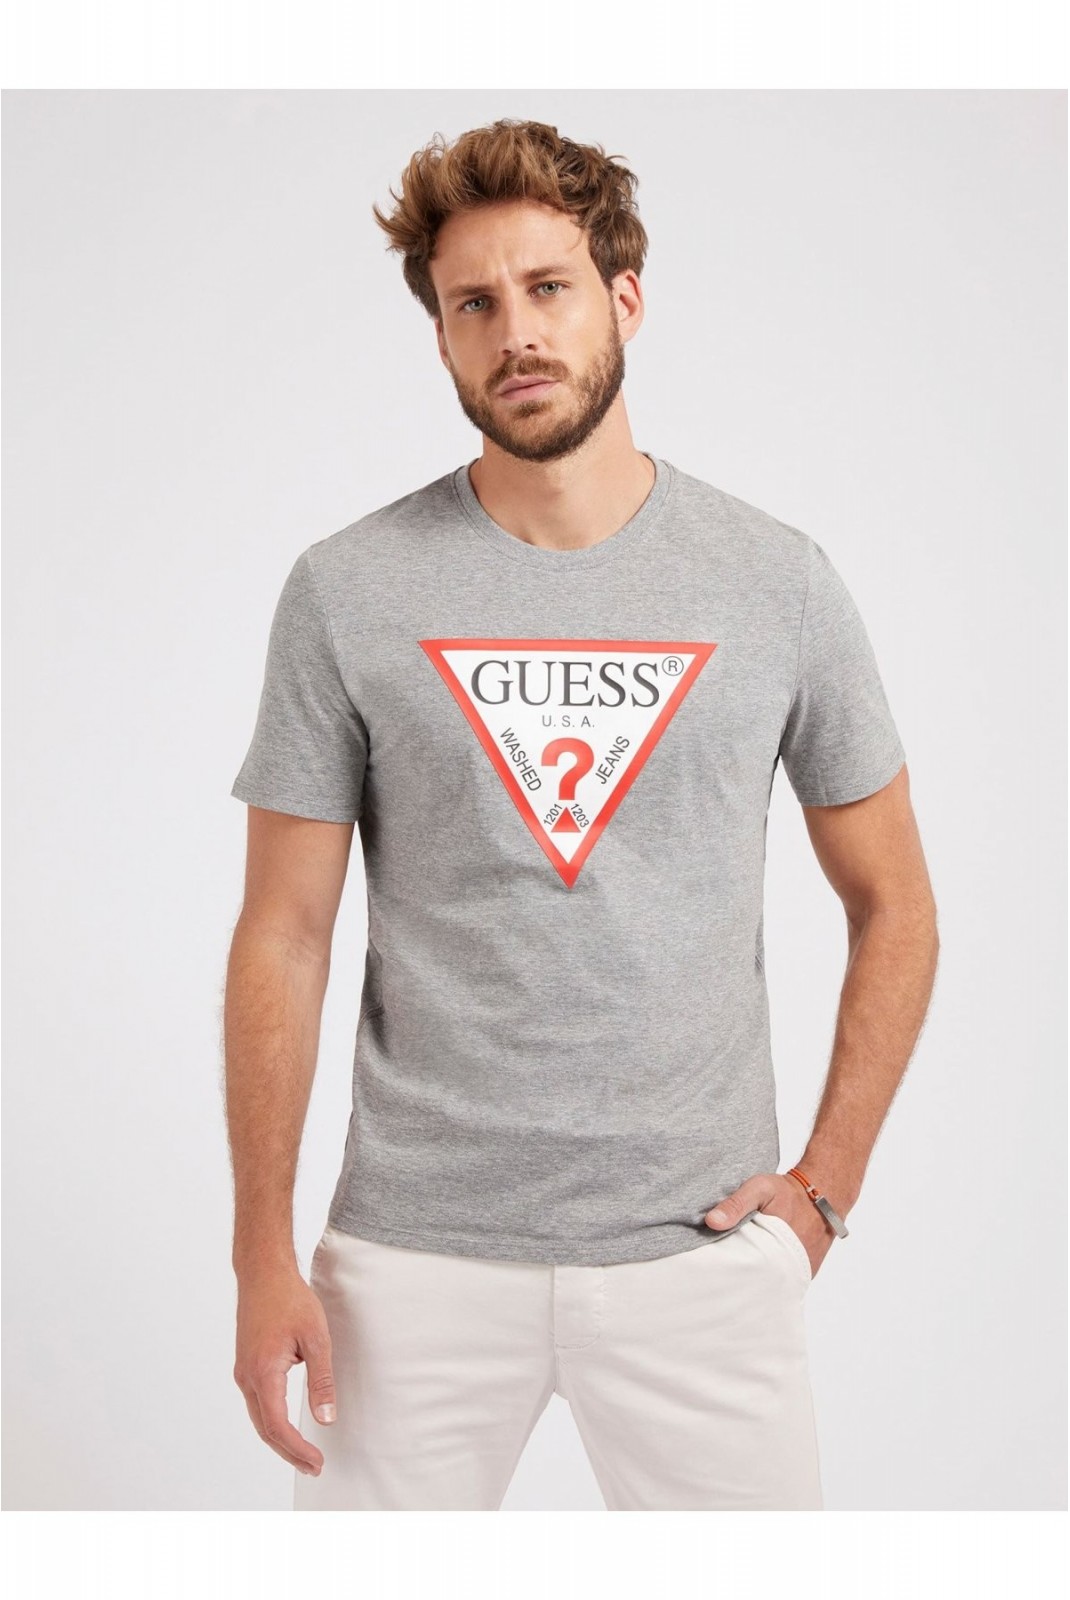 TShirt slim fit logo iconique Guess jeans MRH Marble Heather M2YI71 I3Z14